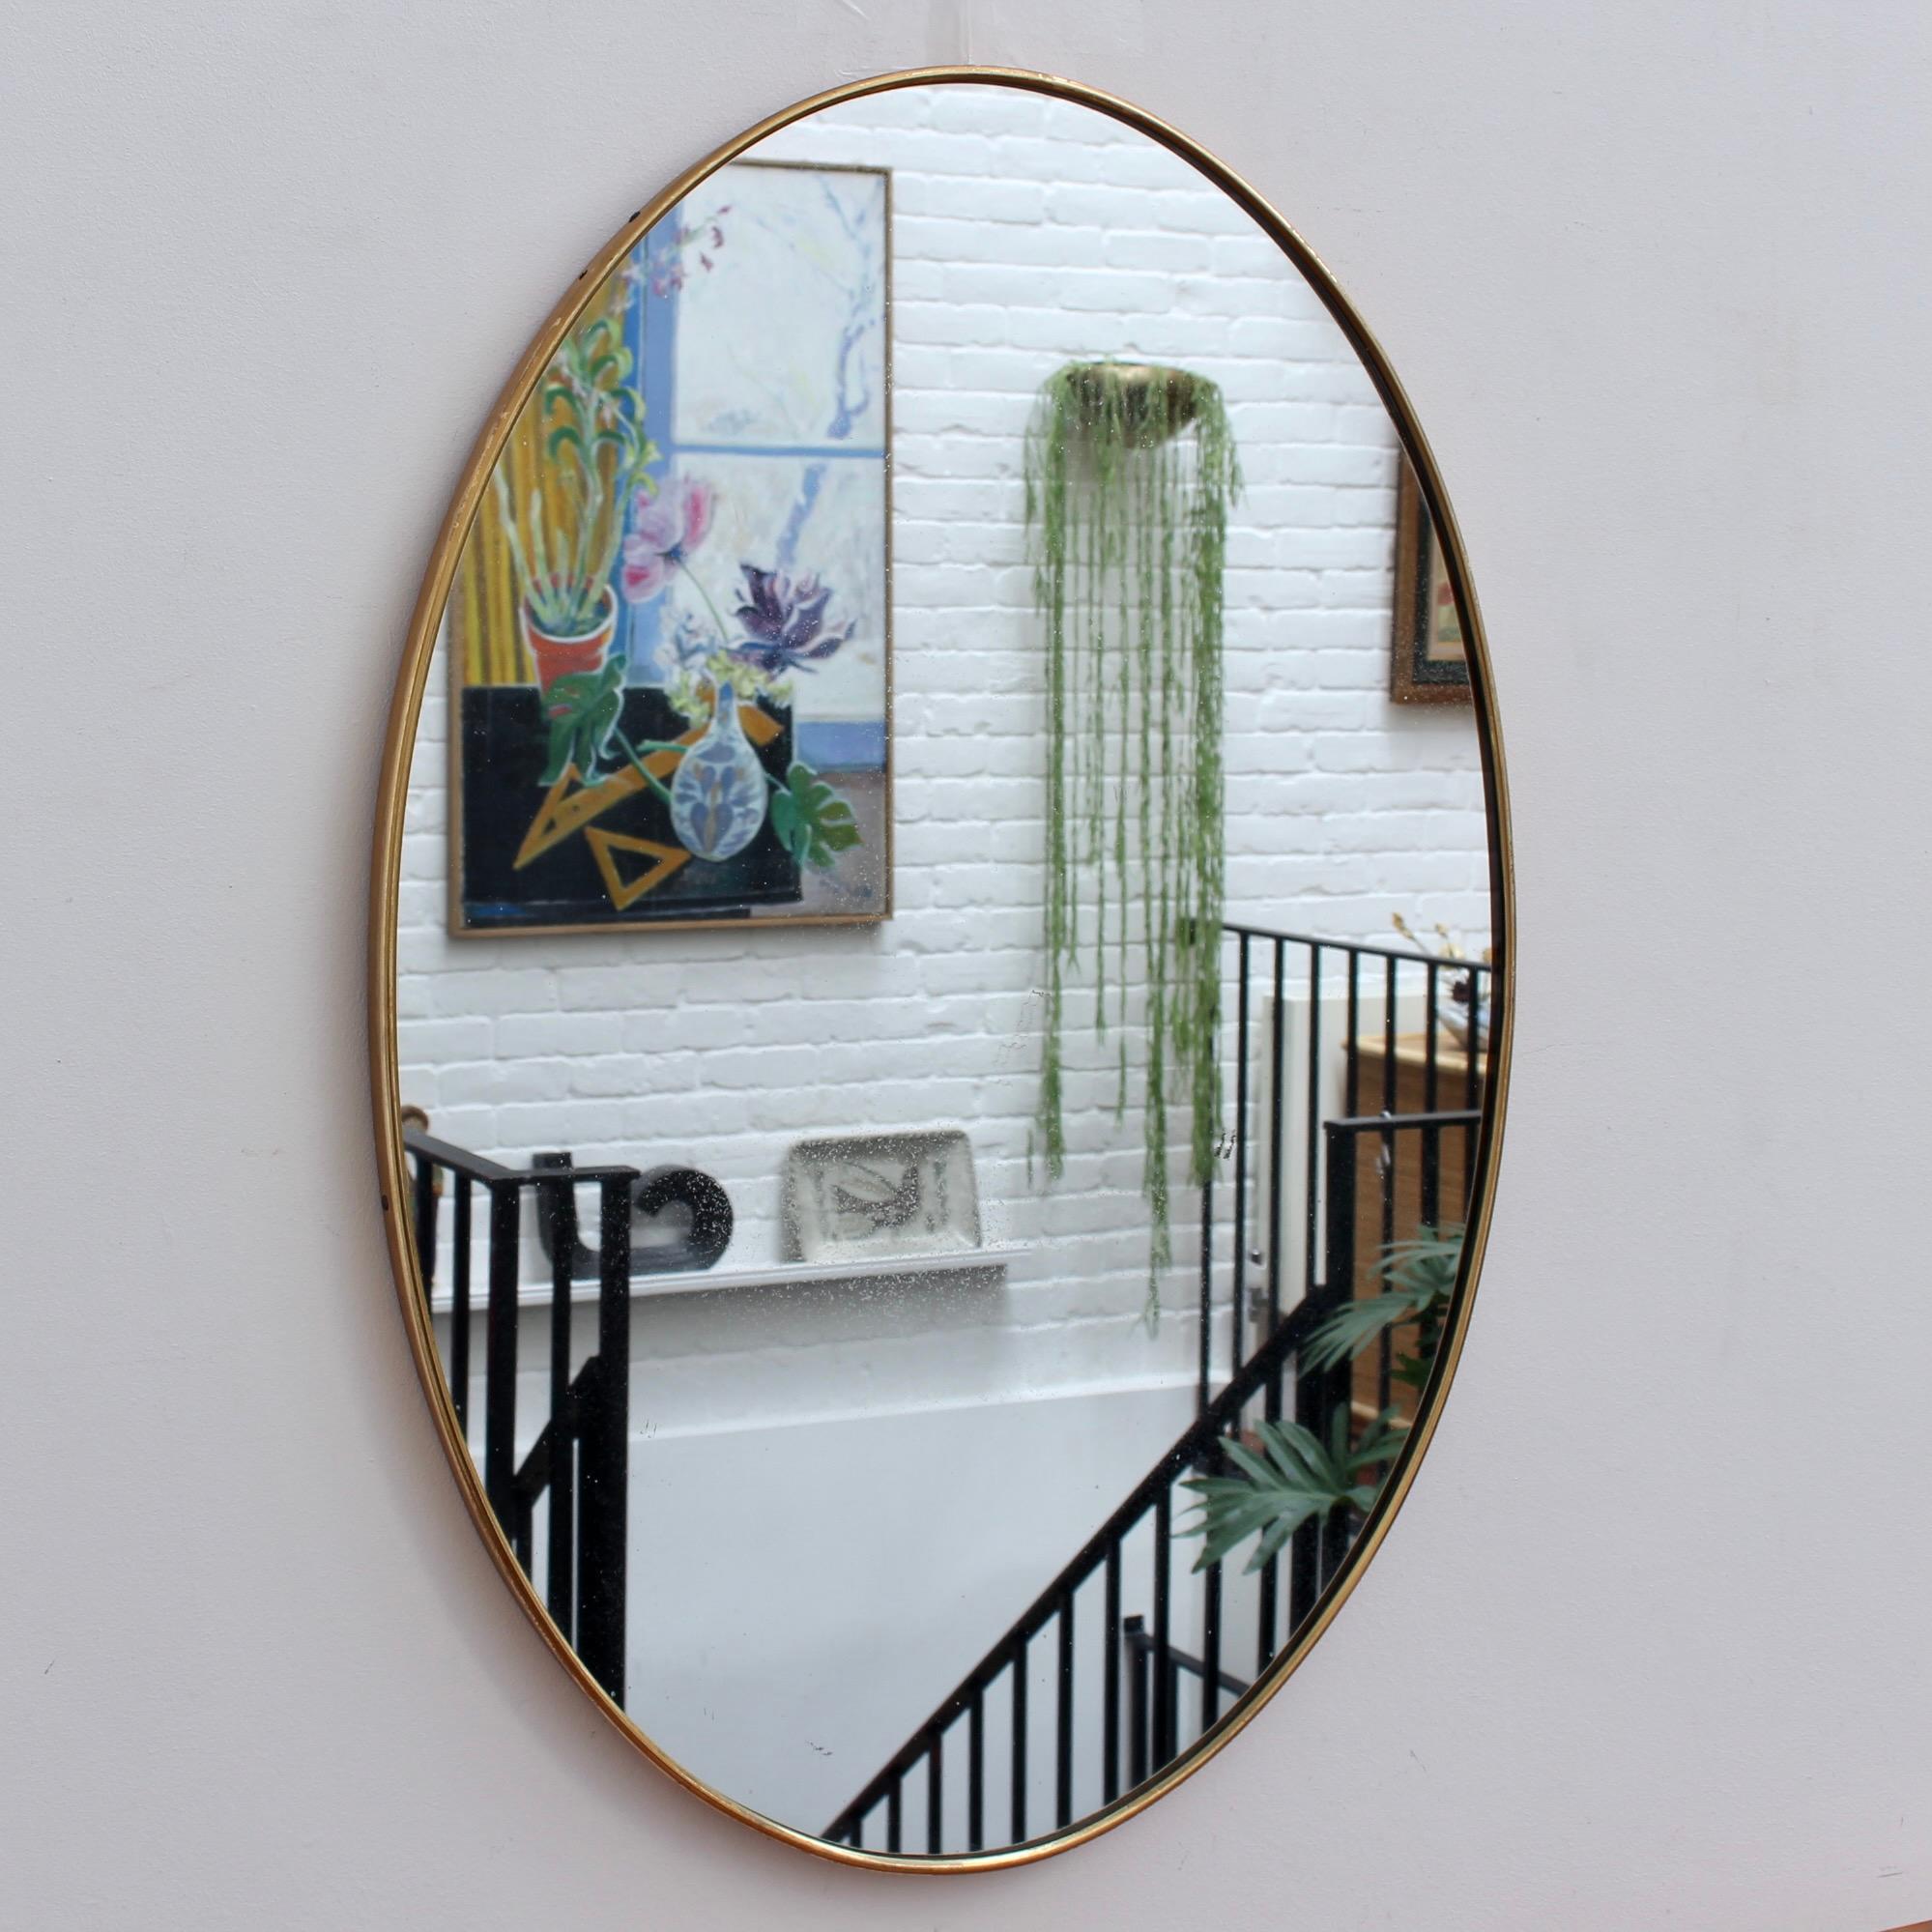 Mid-century Italian wall mirror with brass frame (circa 1950s). The mirror is oval in shape and very smart with rugged durability. The visual impression is elegant and very distinctive in a modern Gio Ponti style. In overall good condition with